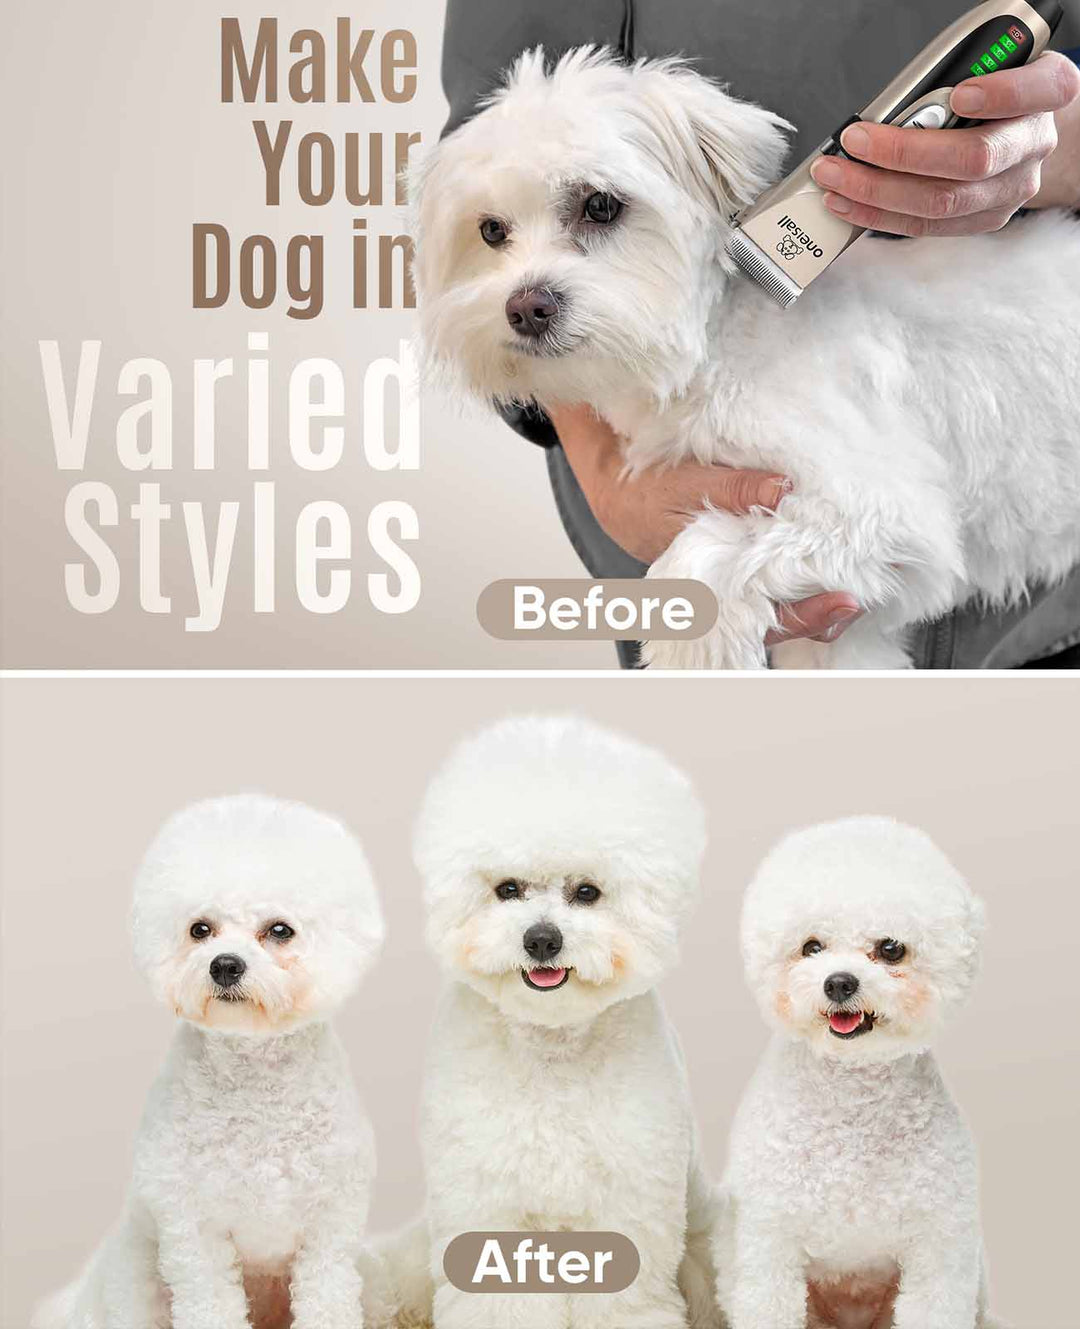 make your dog in varied styles